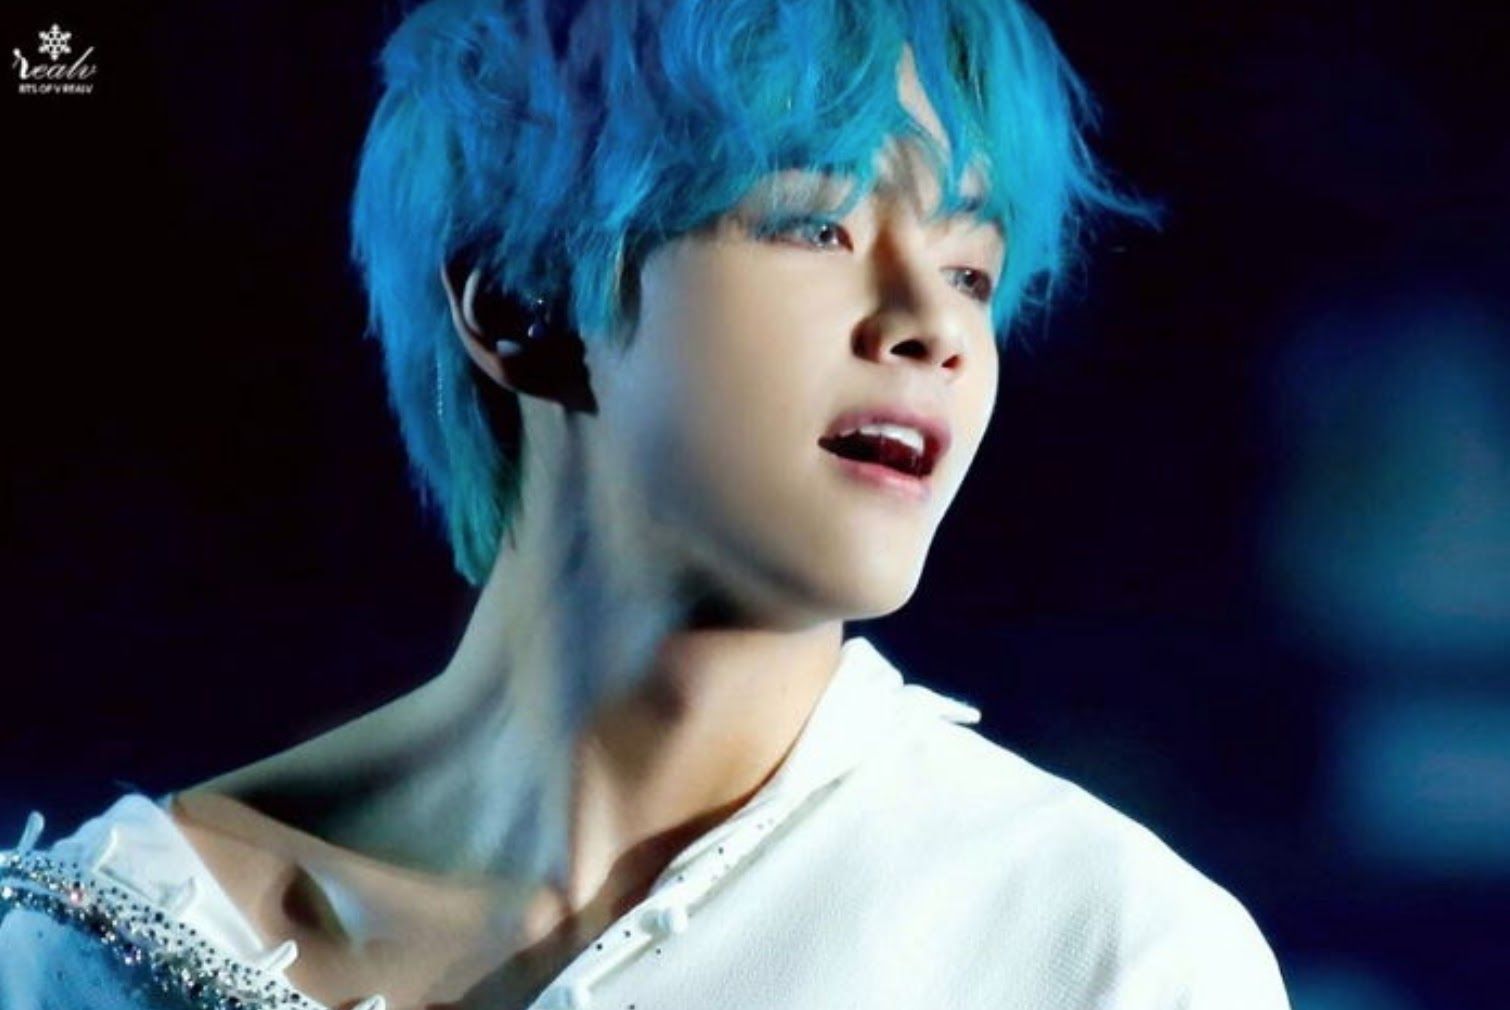 BTS backstage photos with blue hair - wide 5